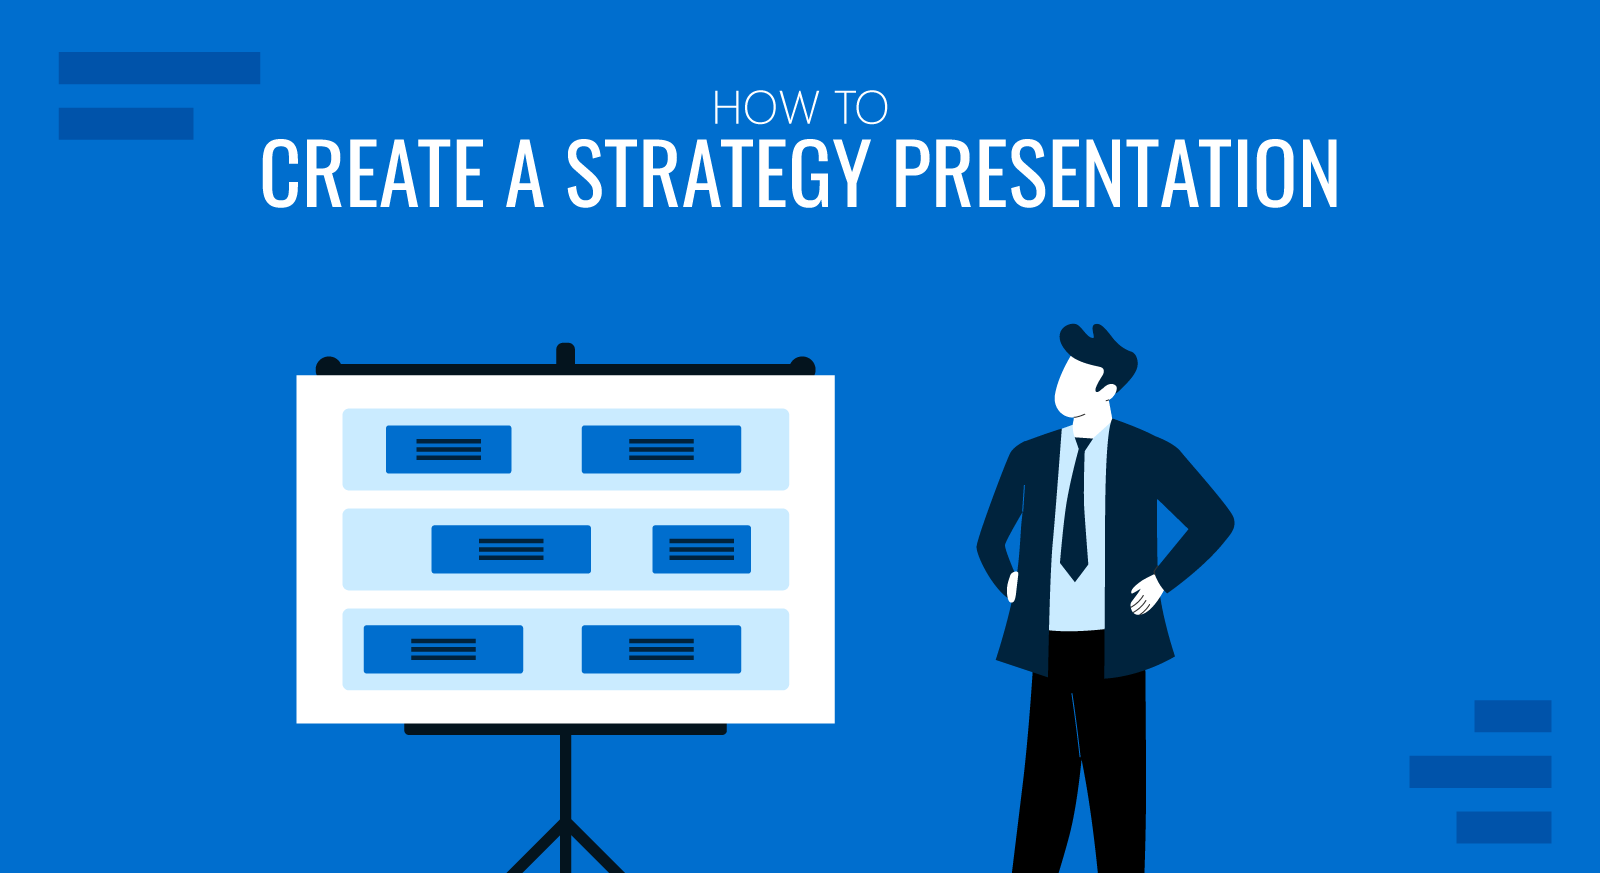 Guide to Crafting a Strategy Presentation